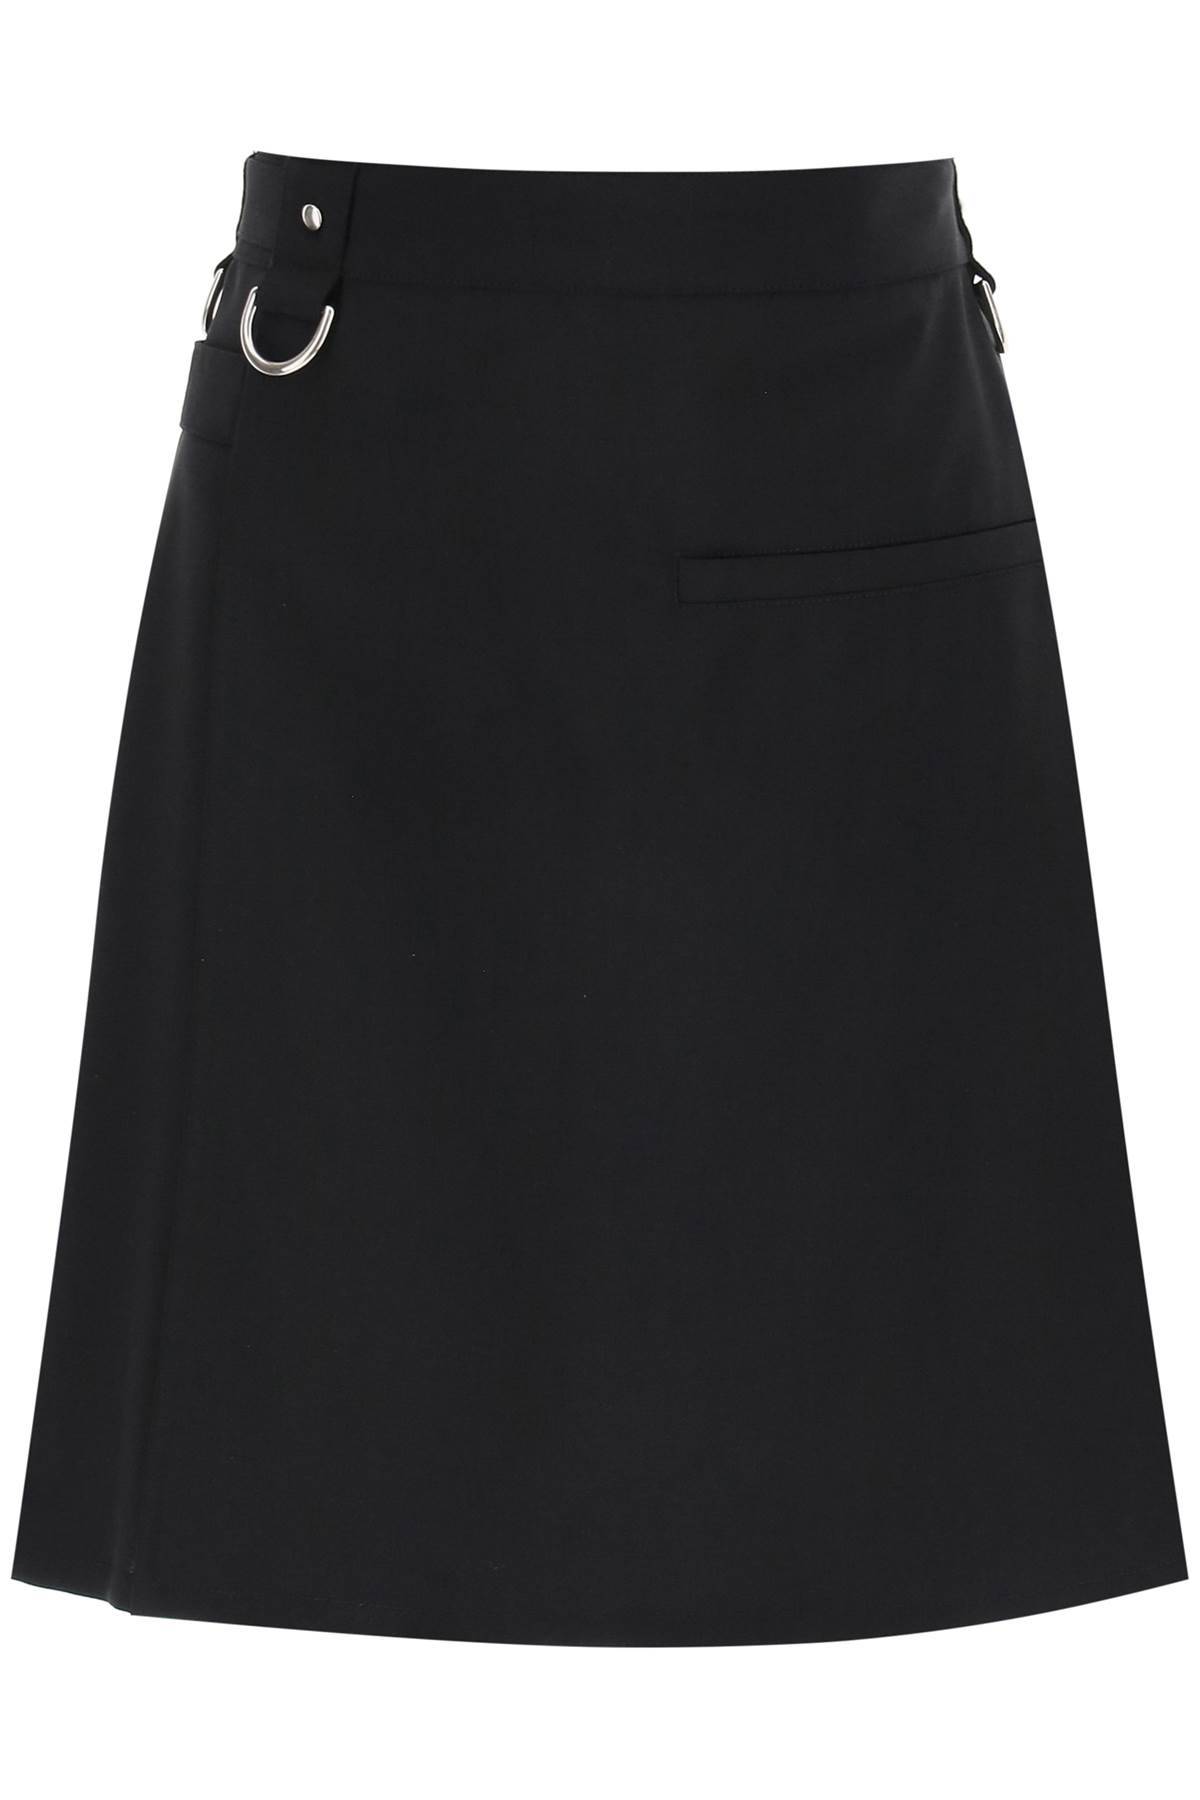 Givenchy Wool And Mohair Kilt Skirt In Black